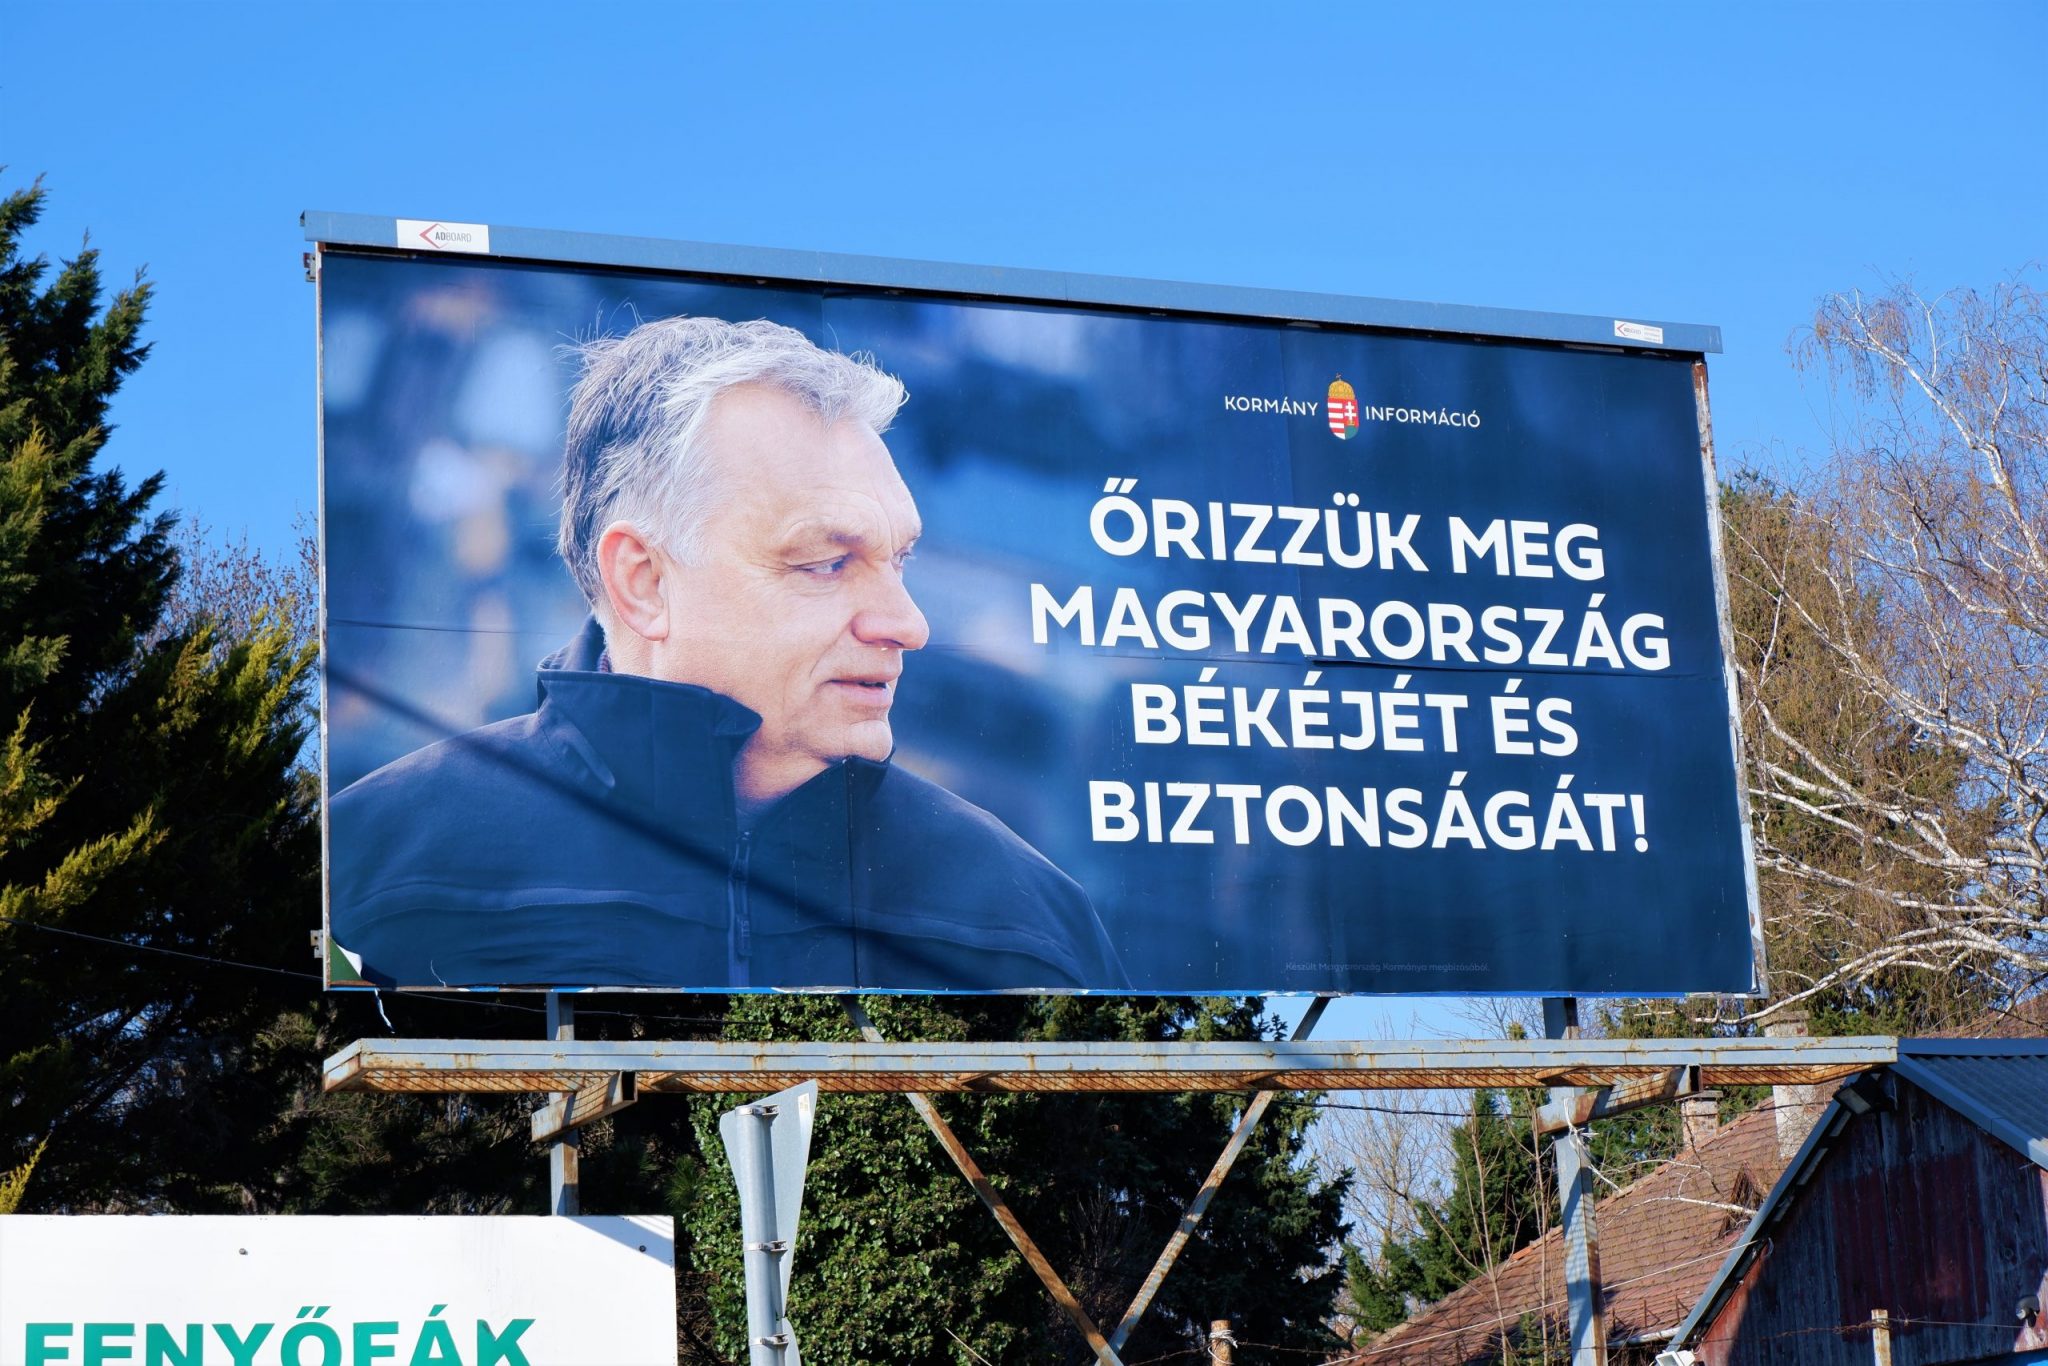 Budapest, Hungary - March 24, 2022: "Let's preserve the peace and security of Hungary!" fidesz parliamentary election campaign poster with picture of Prime Minister Viktor Orban